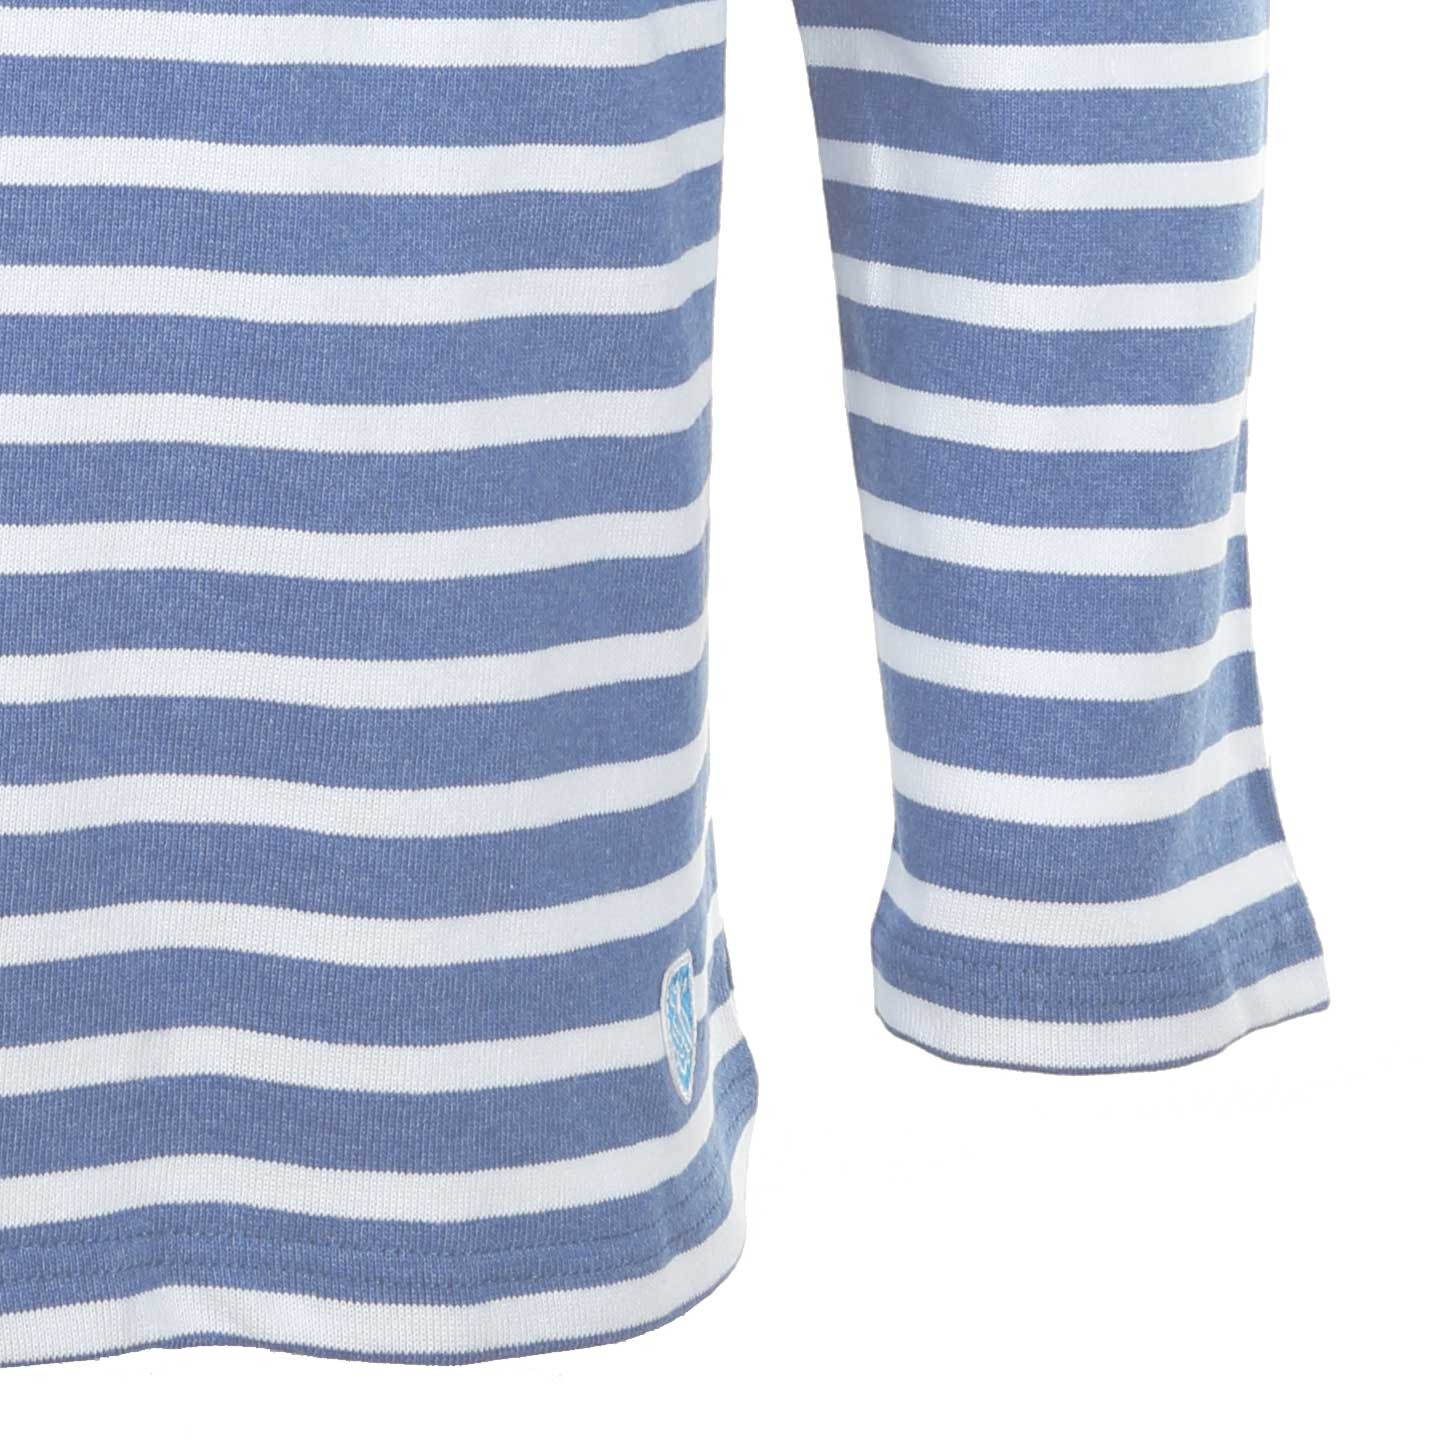 Striped shirt Heather Blue / White, unisex made in France Orcival